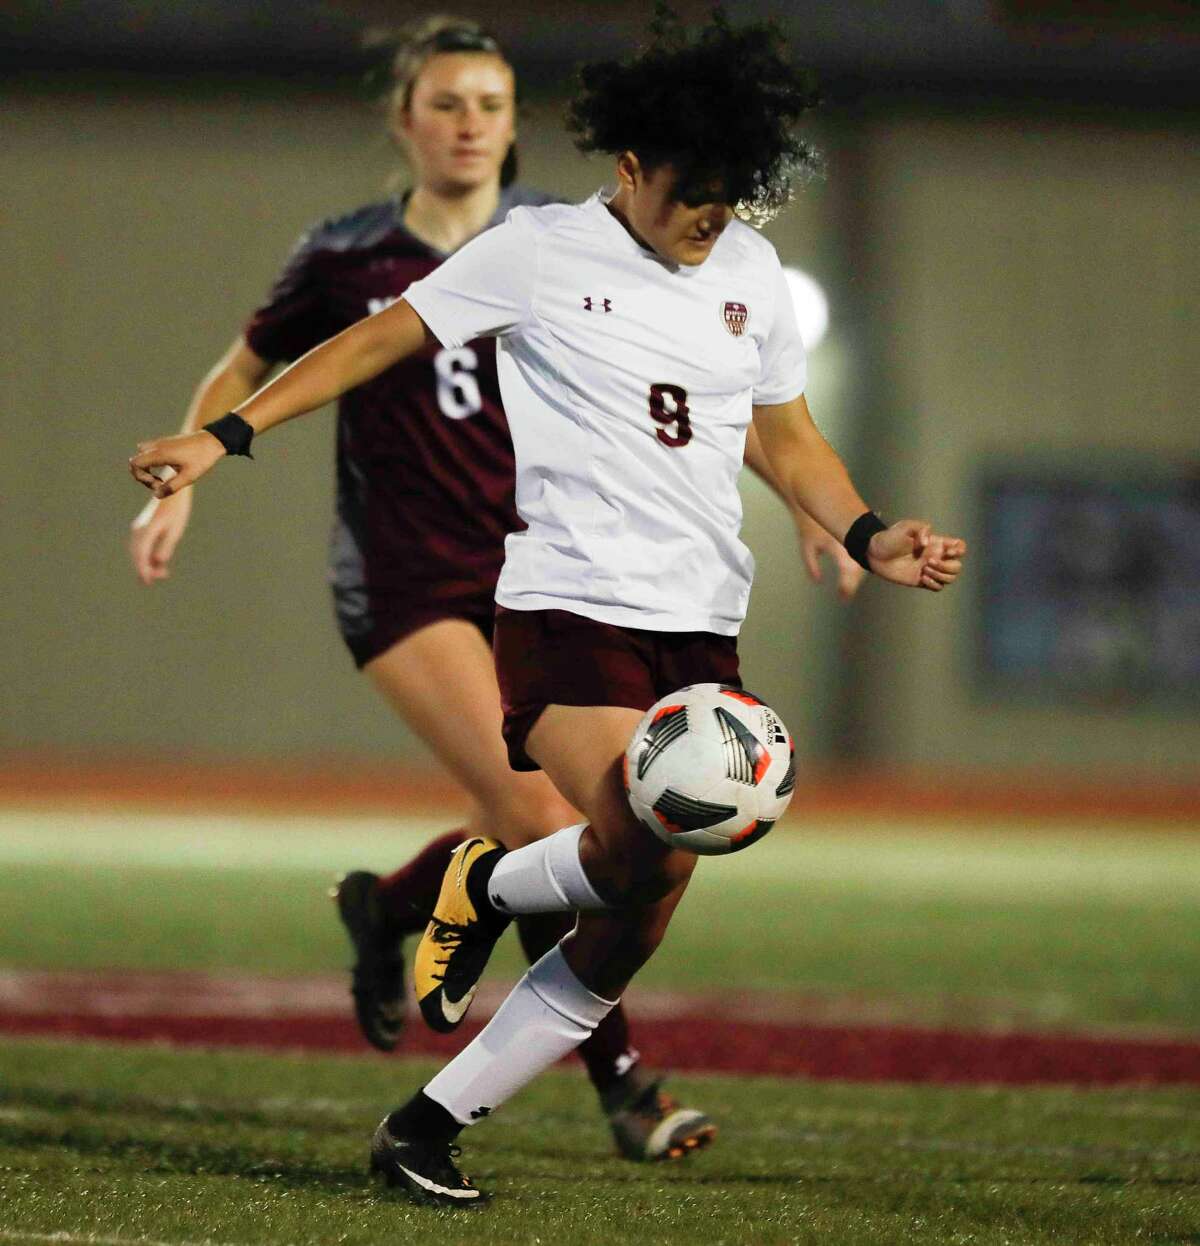 Magnolia West’s Maira Castro (9) dribbles as Magnolia’s Finley Strait (6) defends In the first period of a high school soccer match at Magnolia High School, Friday, March 4, 2022, in Magnolia.